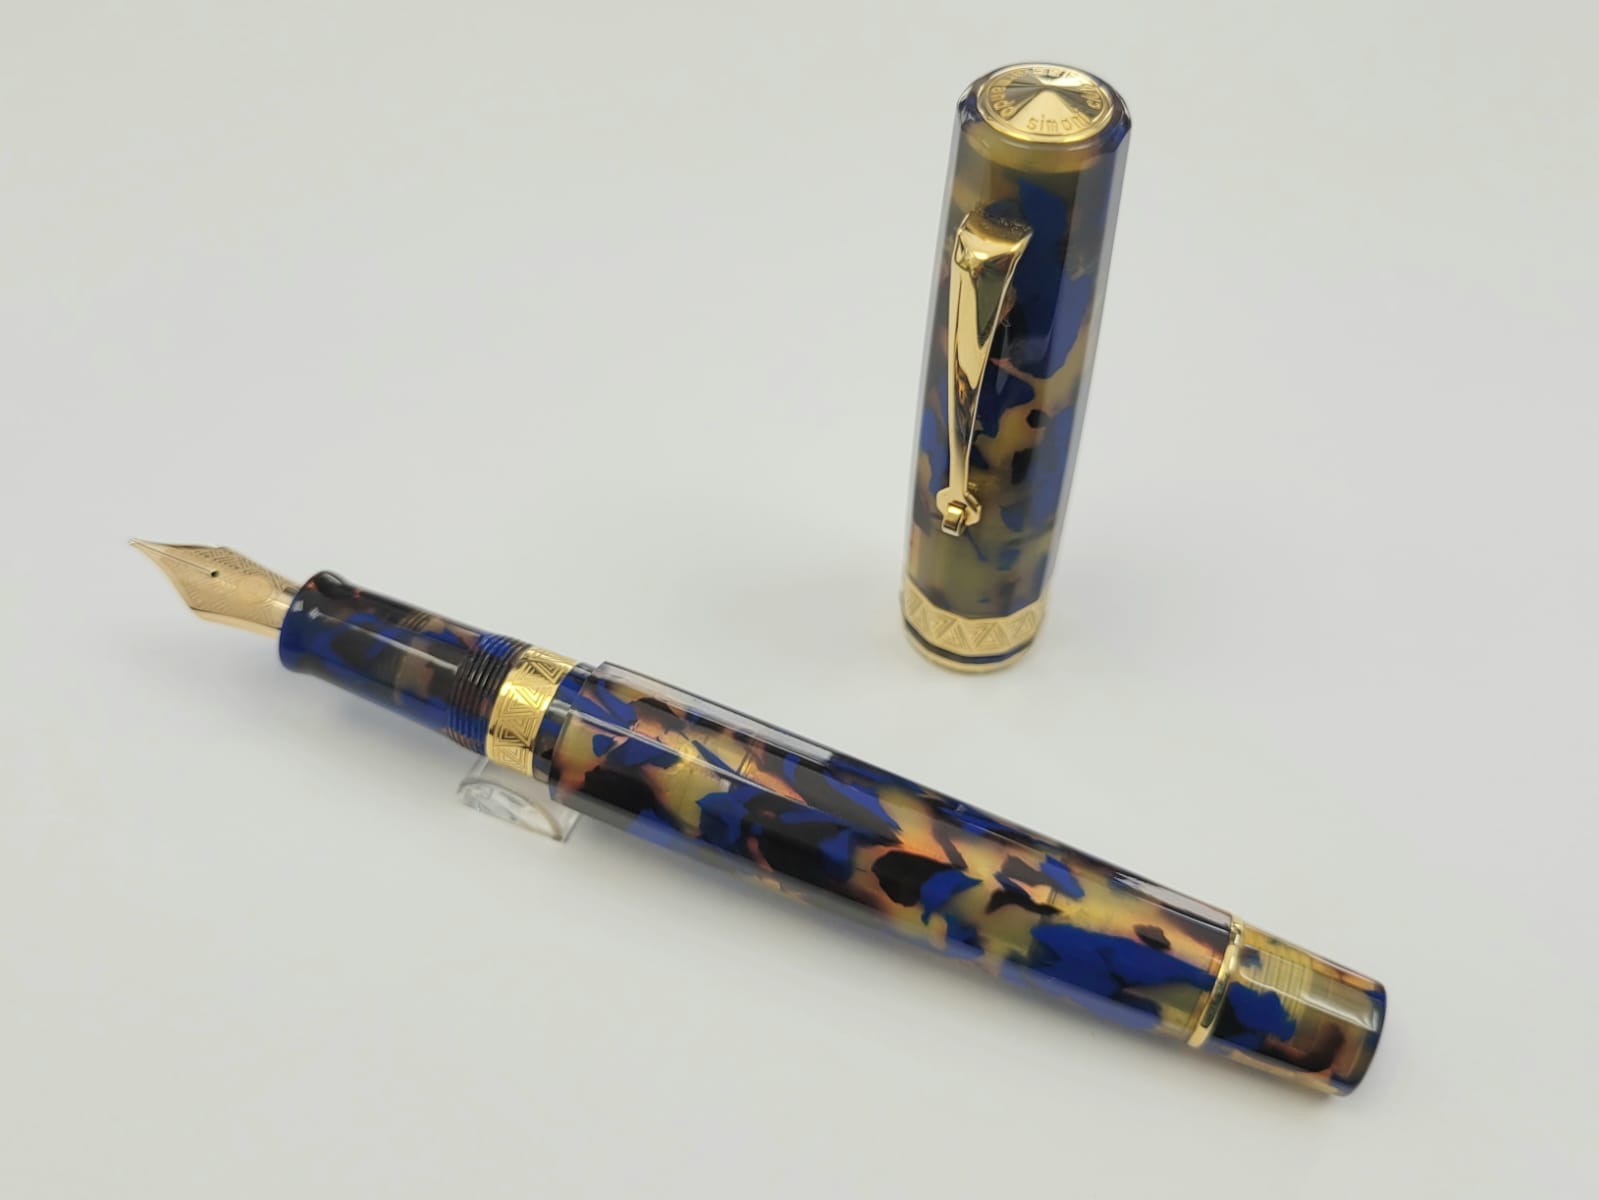 NEW! ASC Gladiatore Medio Bespoke Blue Lucens Celluloid - Limited Edition of 23 Pens